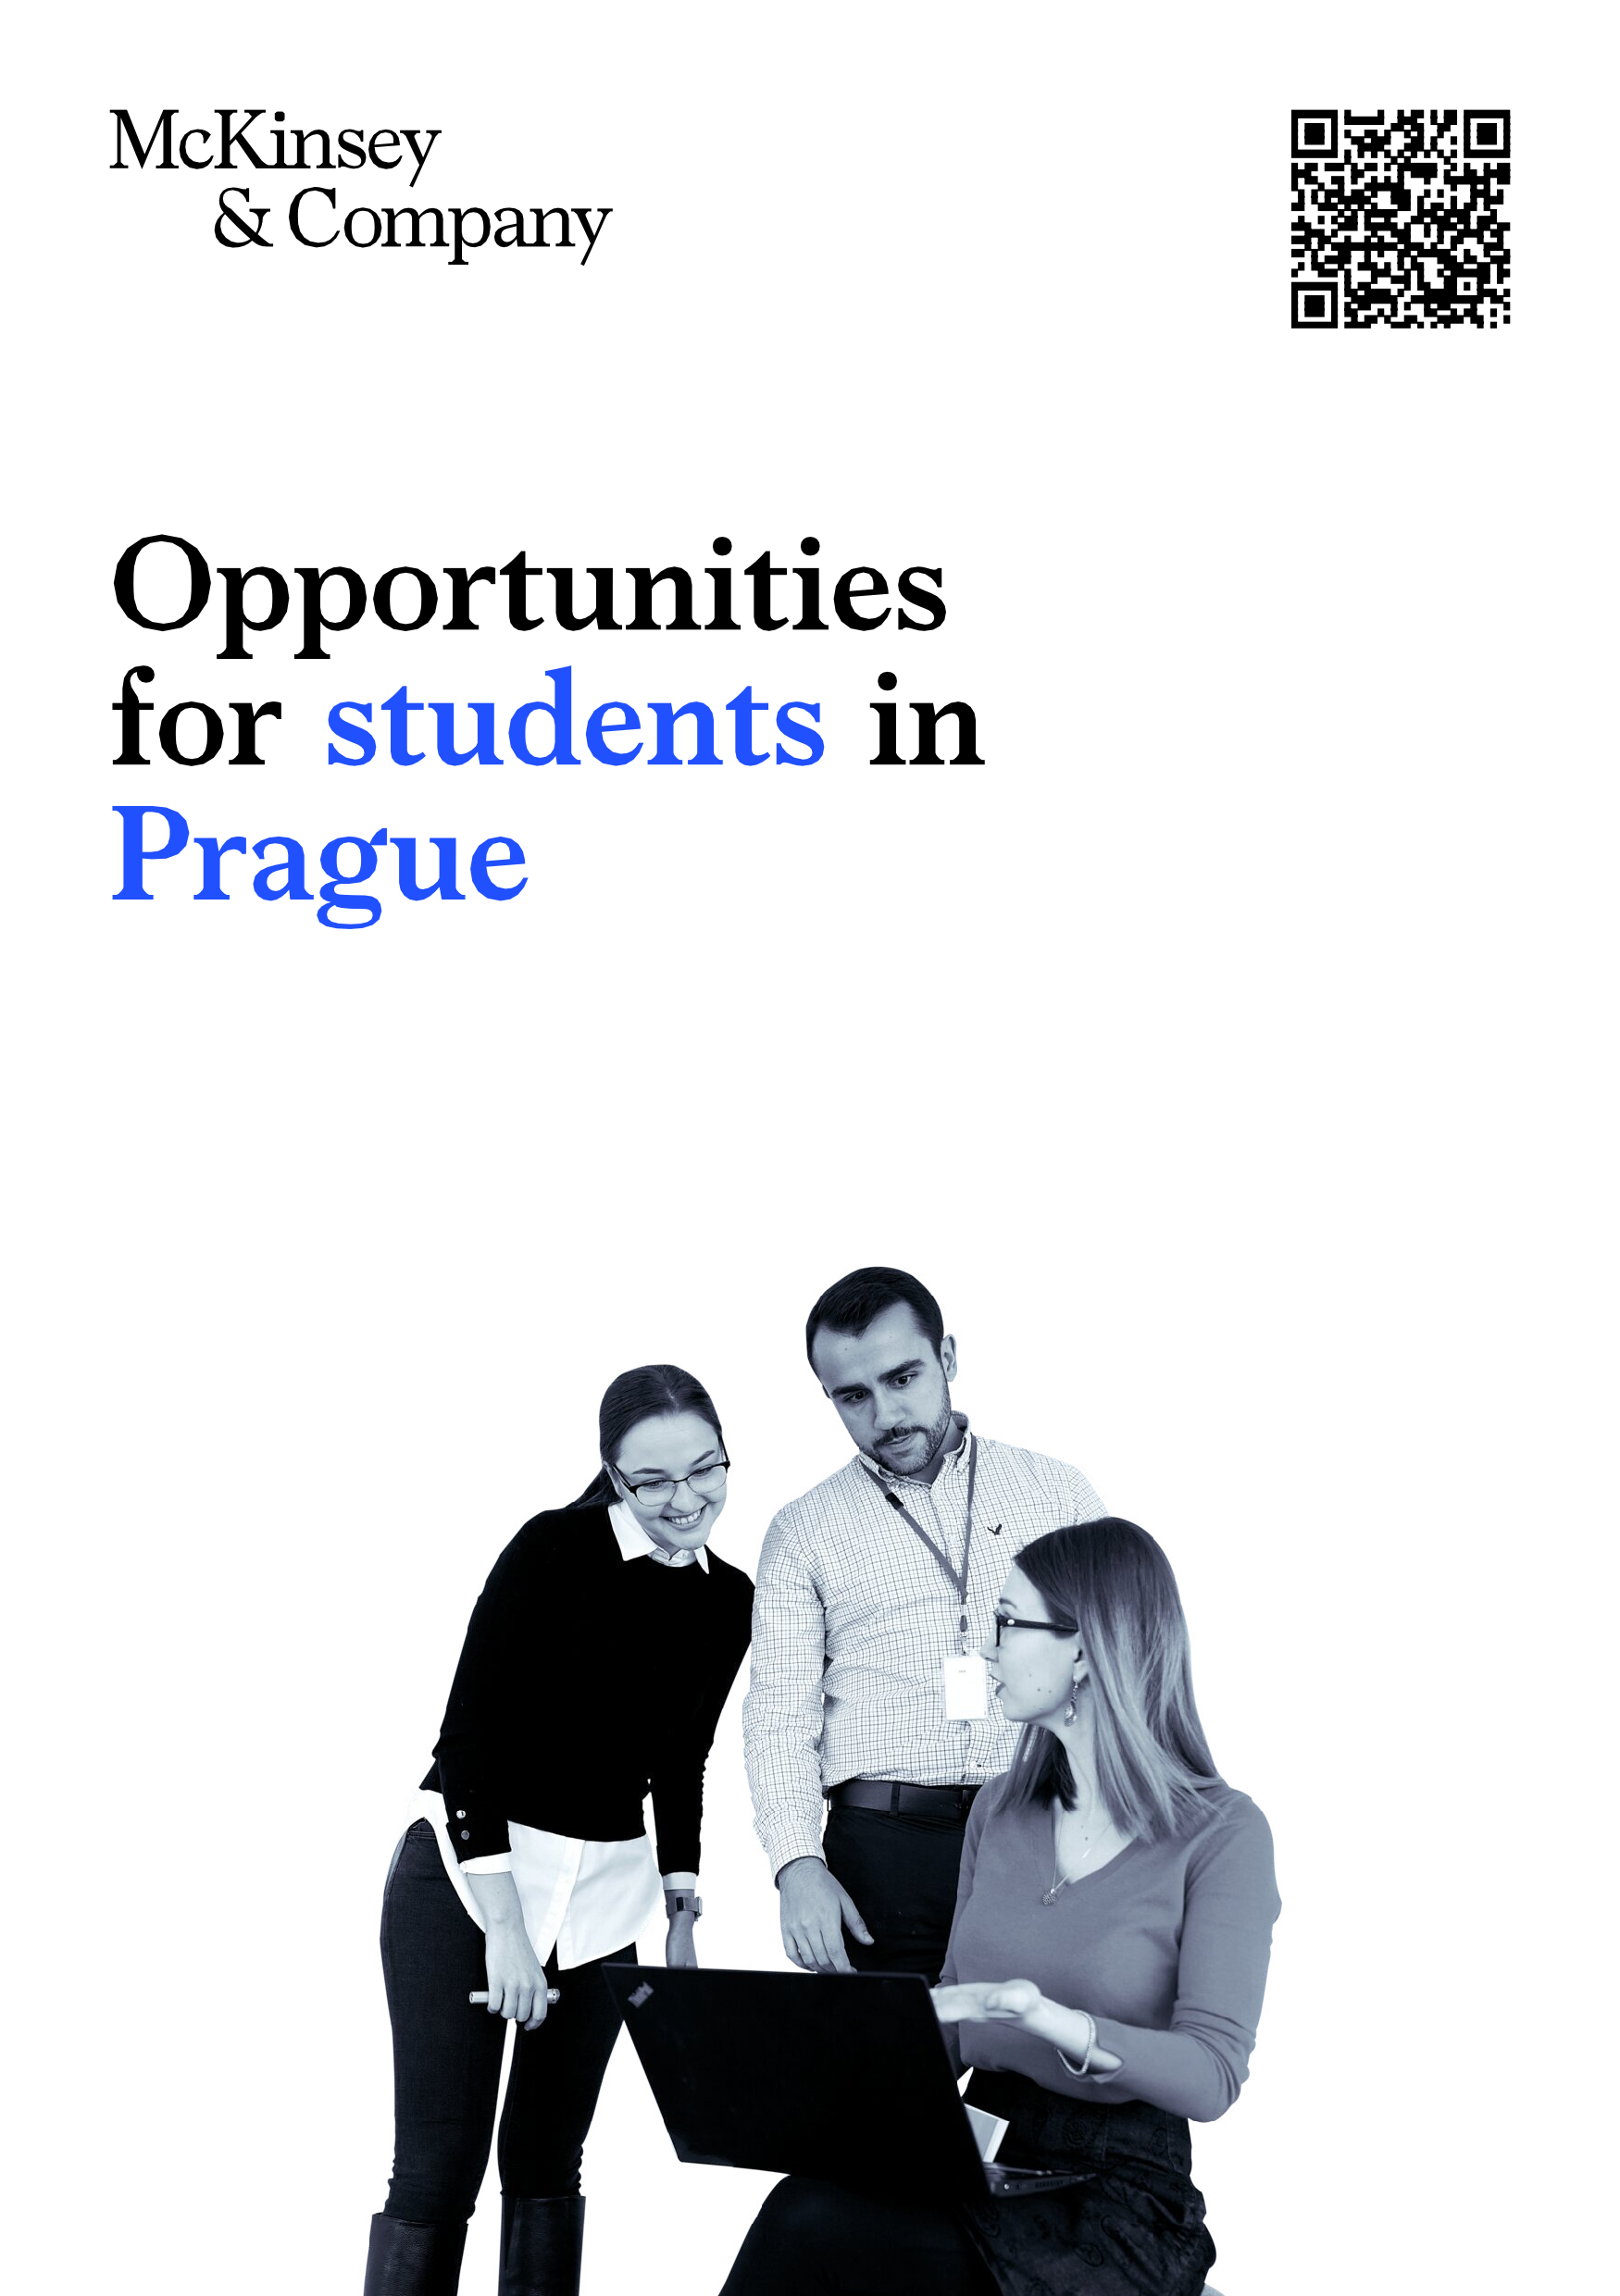 Opportunities for students in Prague by McKinsey&Company